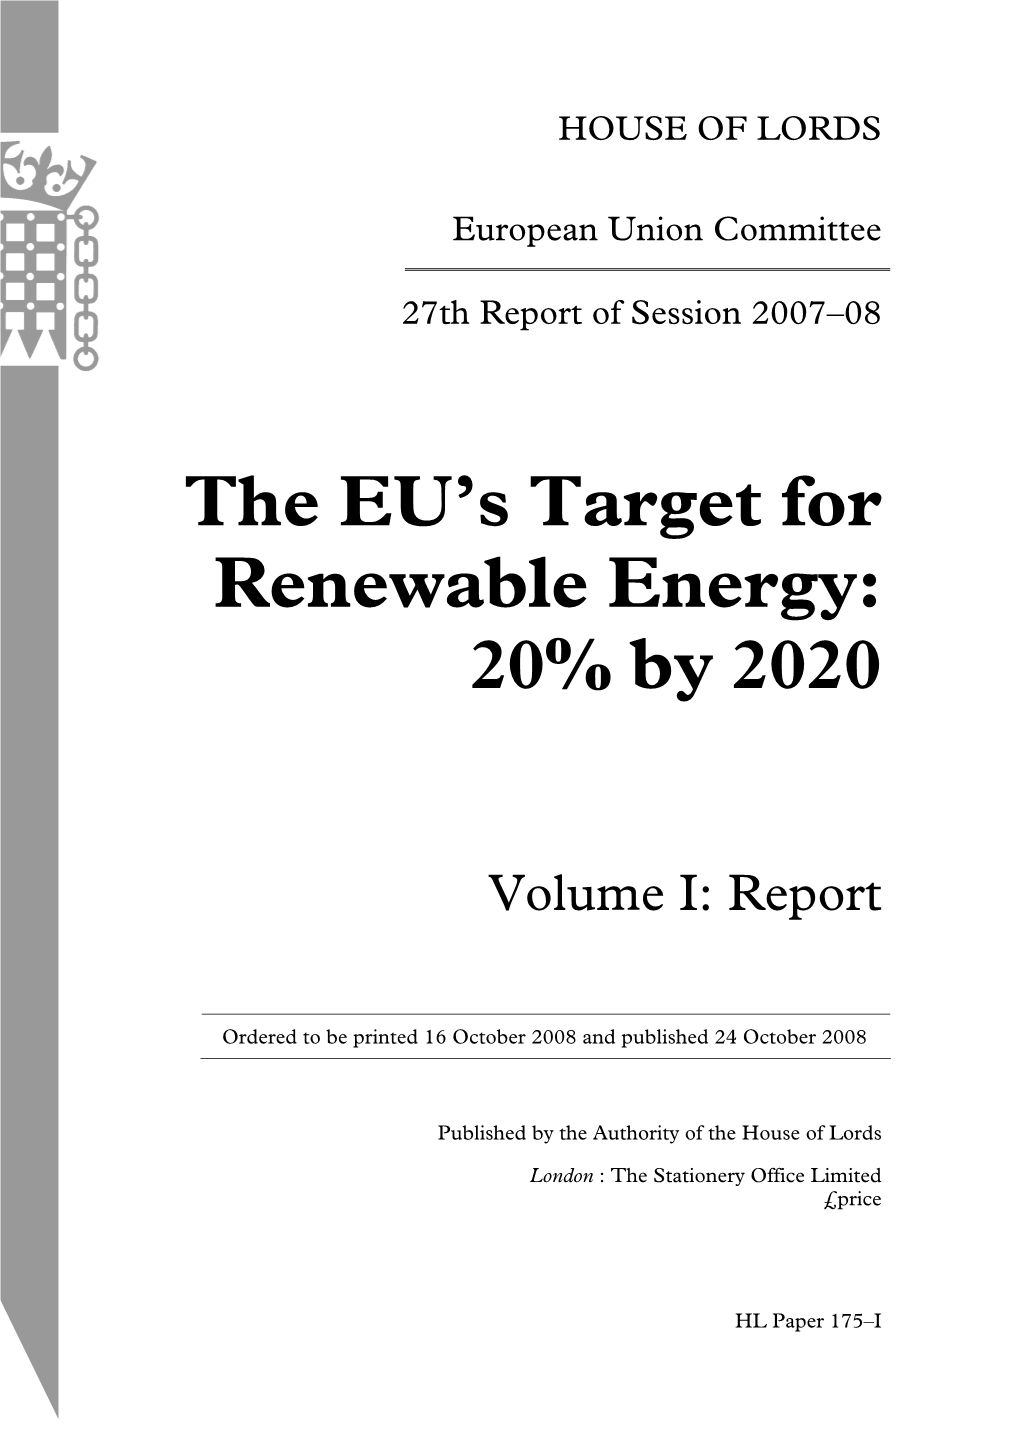 The Eu's Target for Renewable Energy: 20% by 2020